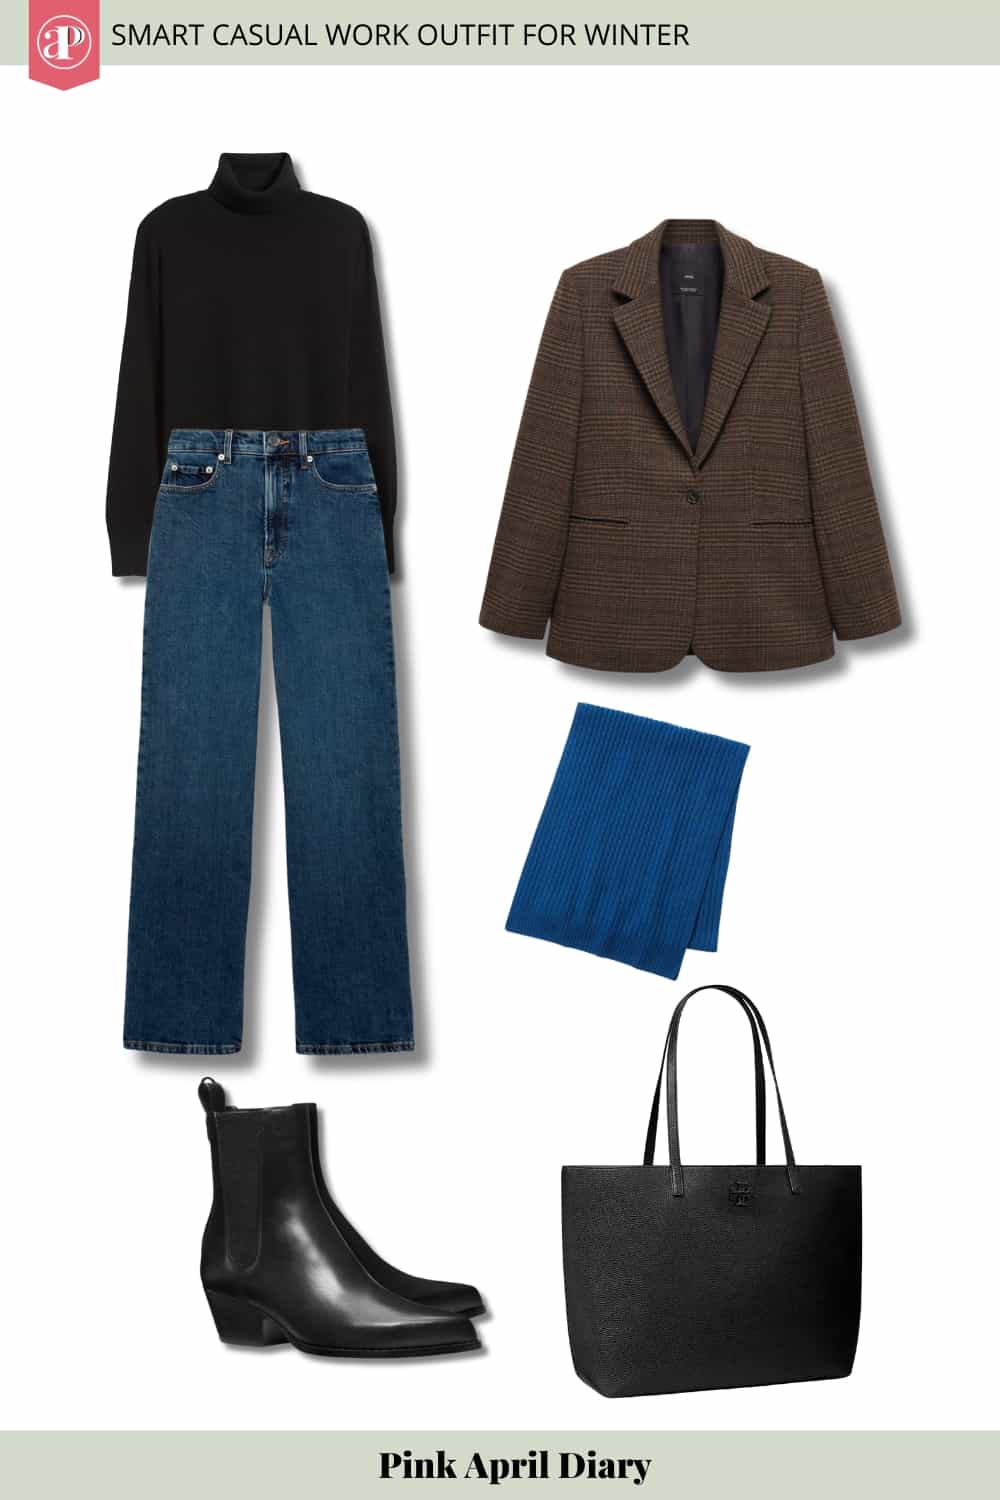 Smart Casual Winter Work Outfit 4